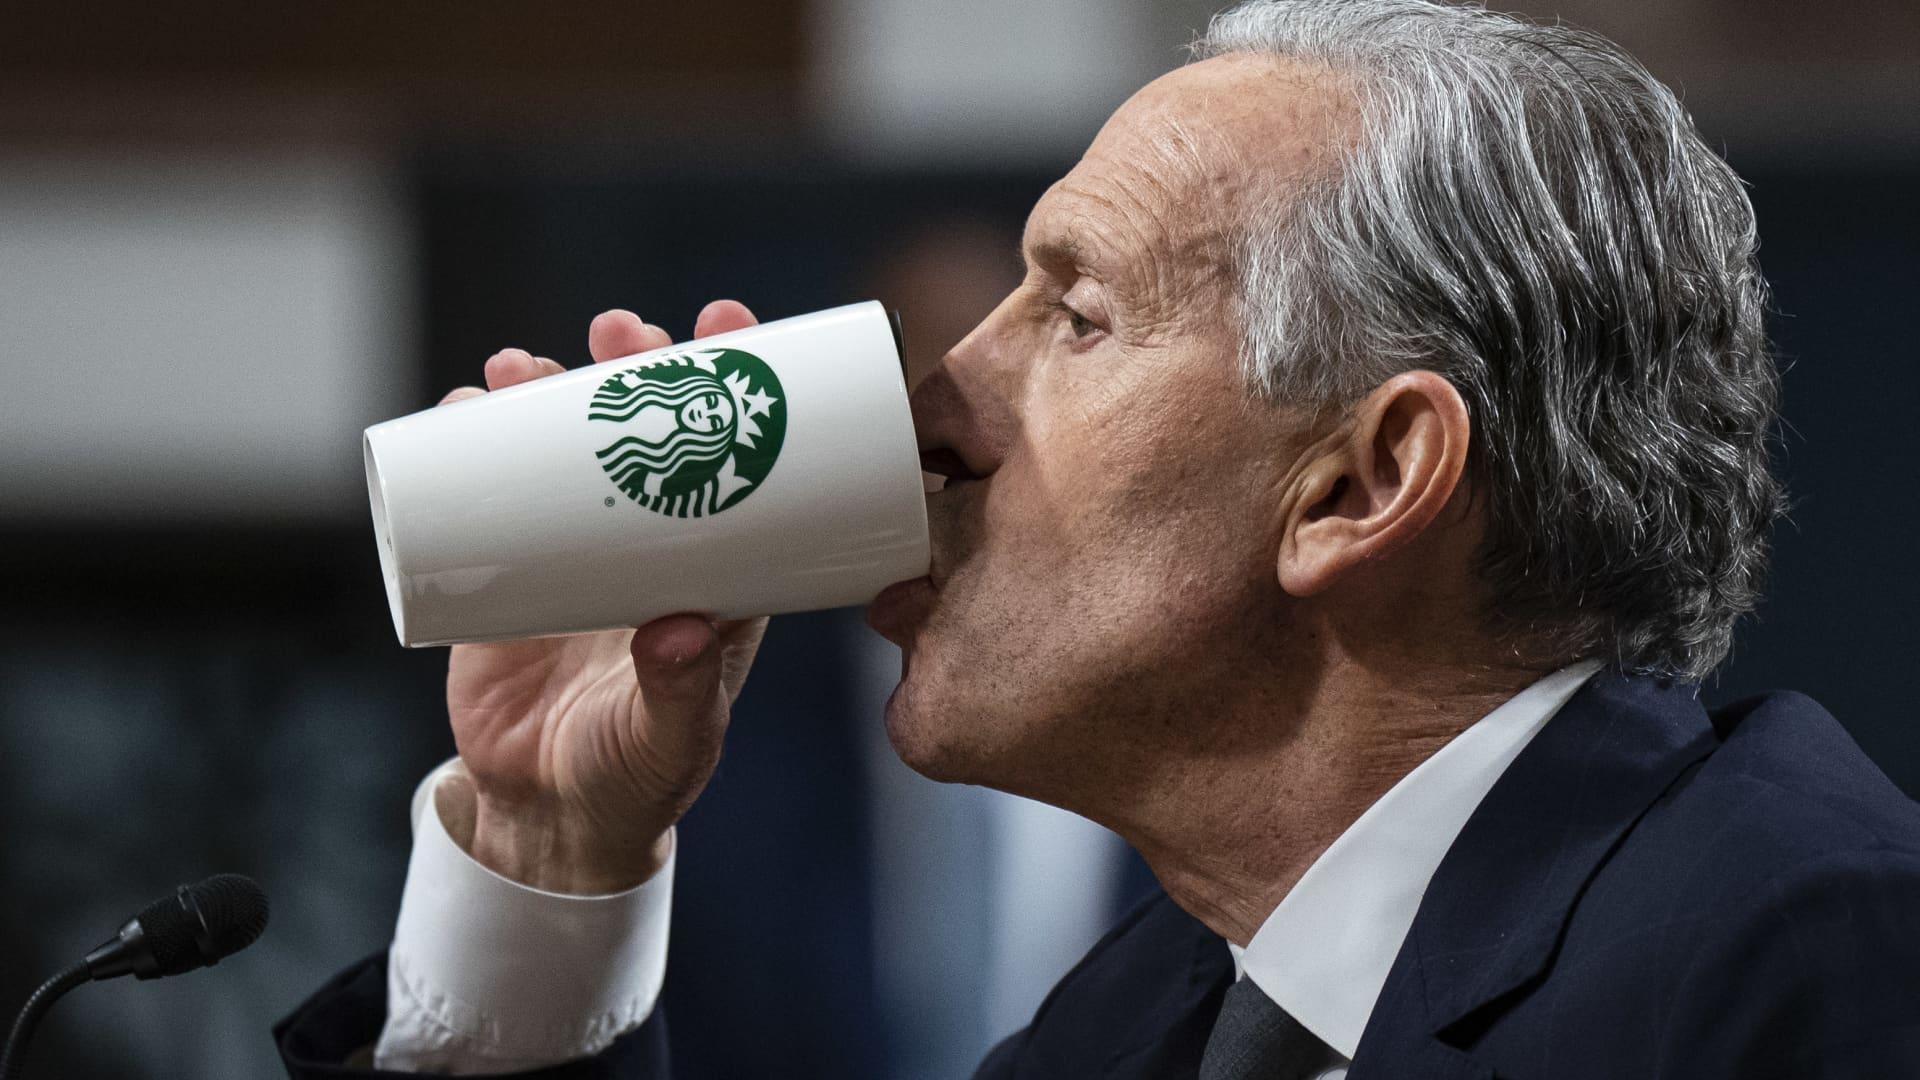 Ex-CEO Howard Schultz says Starbucks needs to revamp its stores after big earnings miss